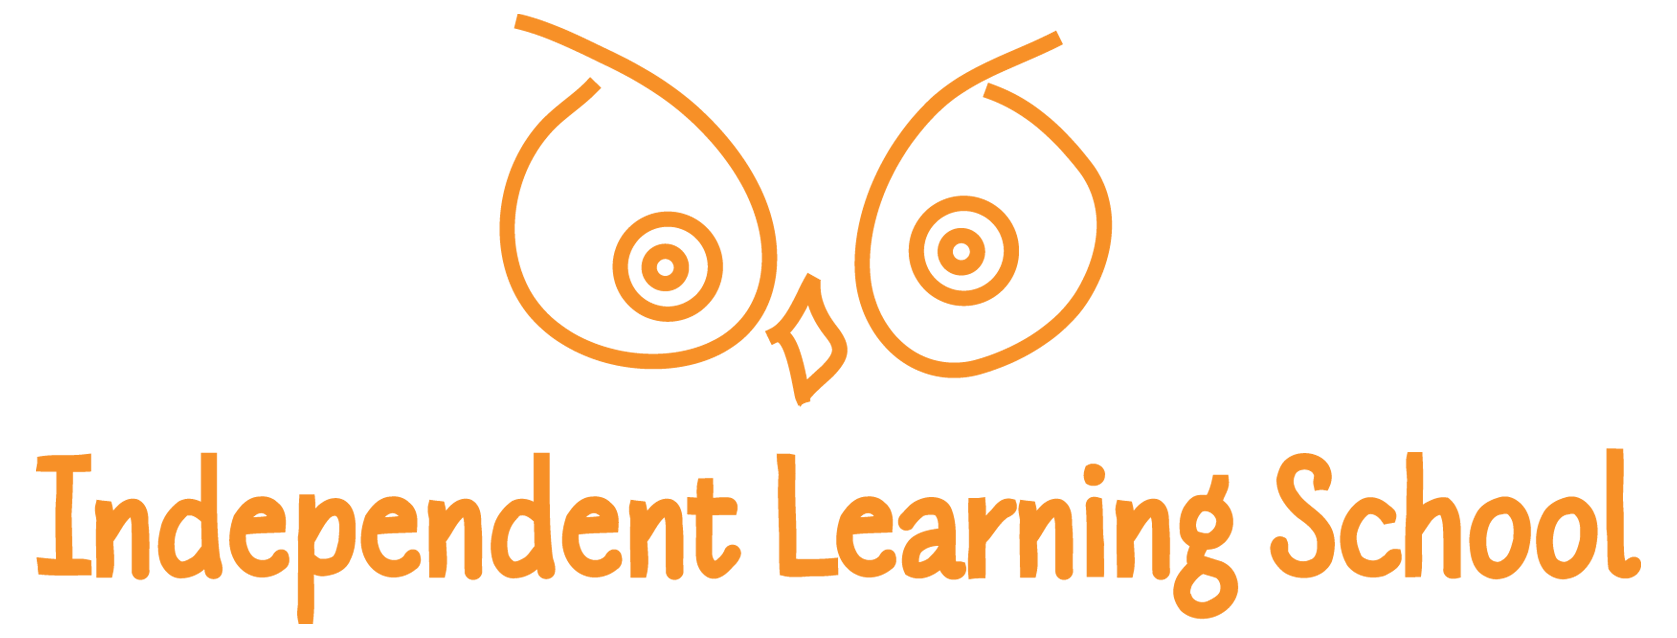 Independent Learning School